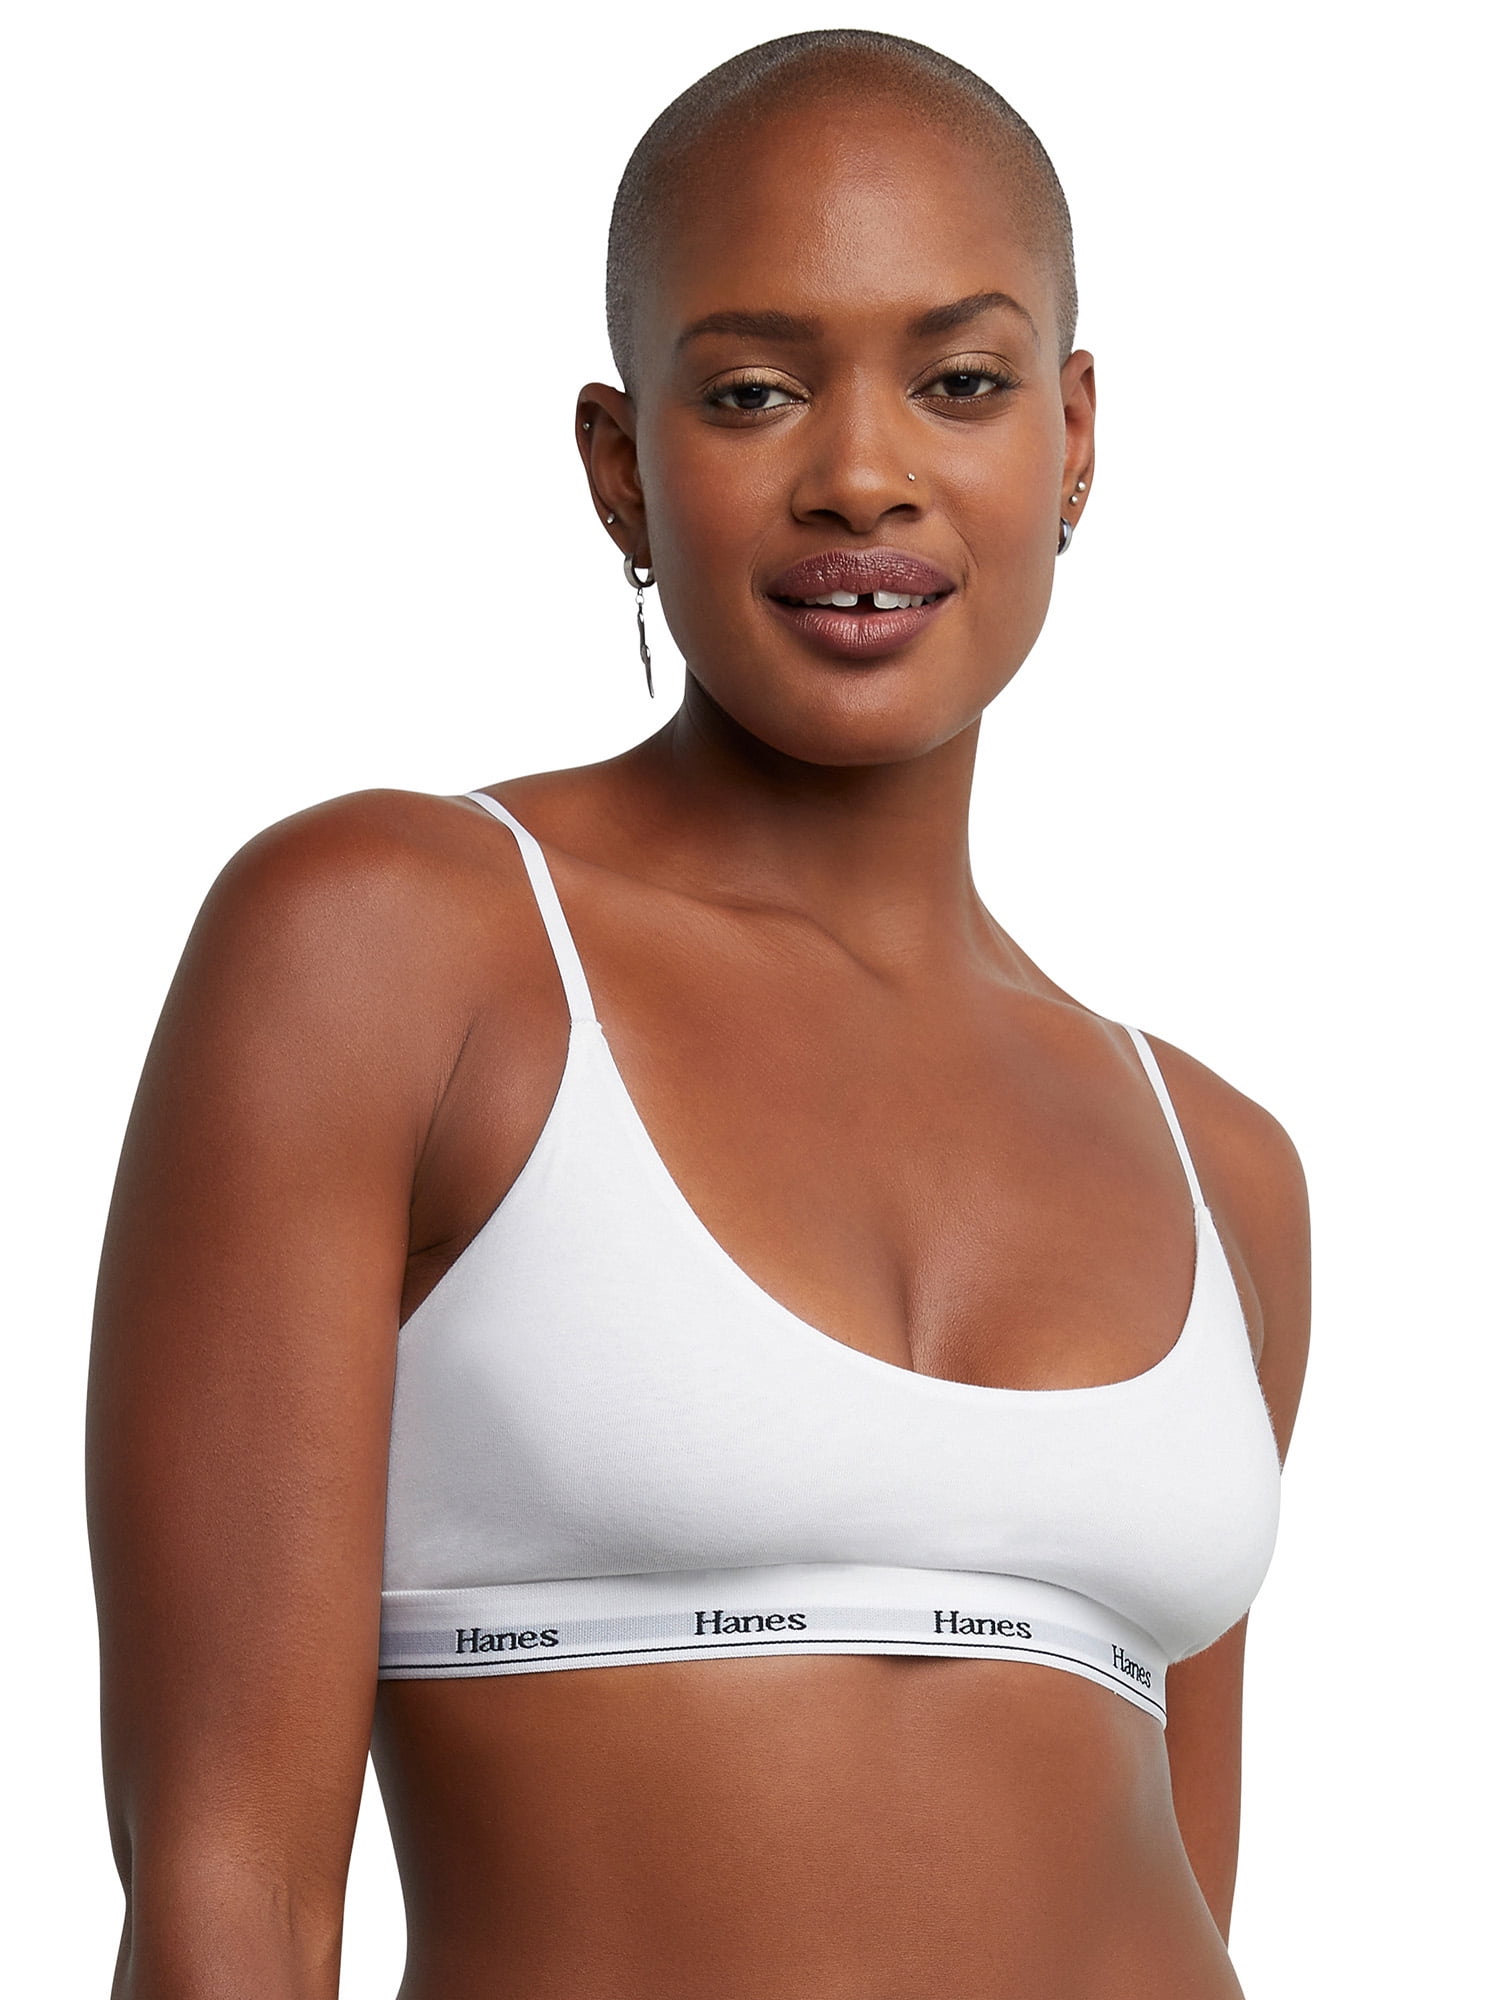 Hanes Originals Women's Cropped Bralette, Breathable Stretch Cotton, 2-Pack,  Style MHO103 